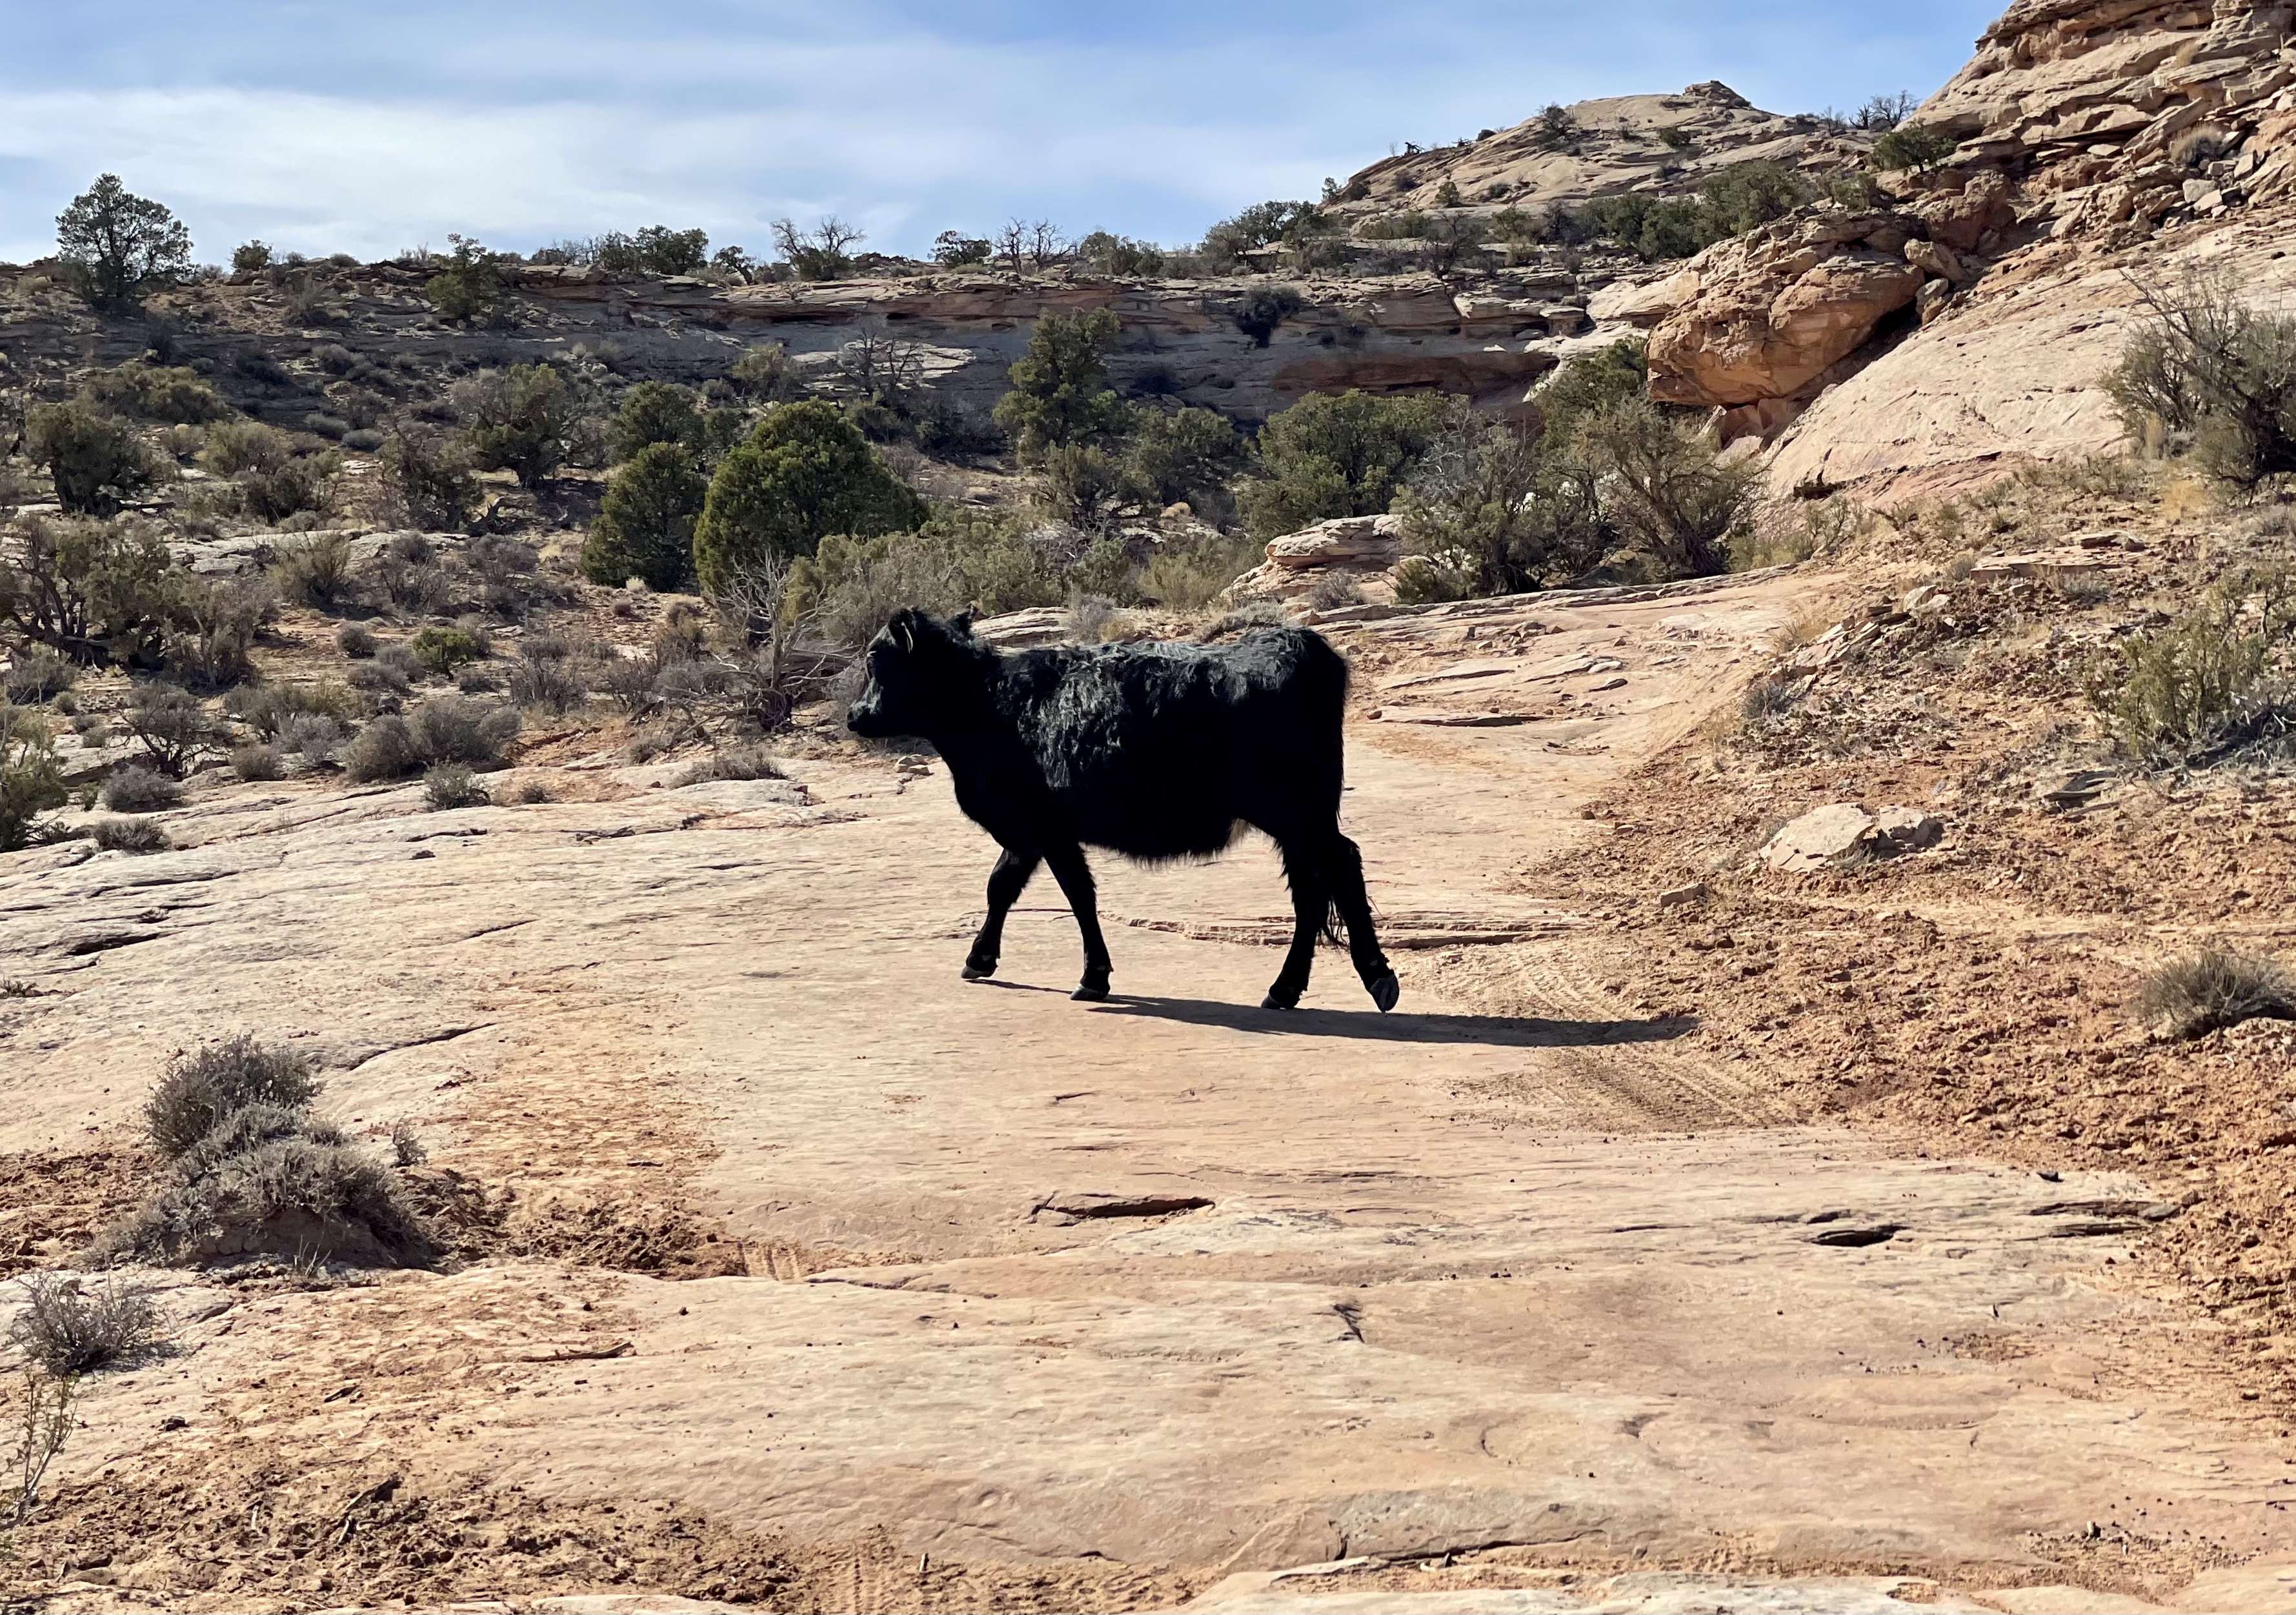 An off-road trail crosses the path of a cow wandering the area